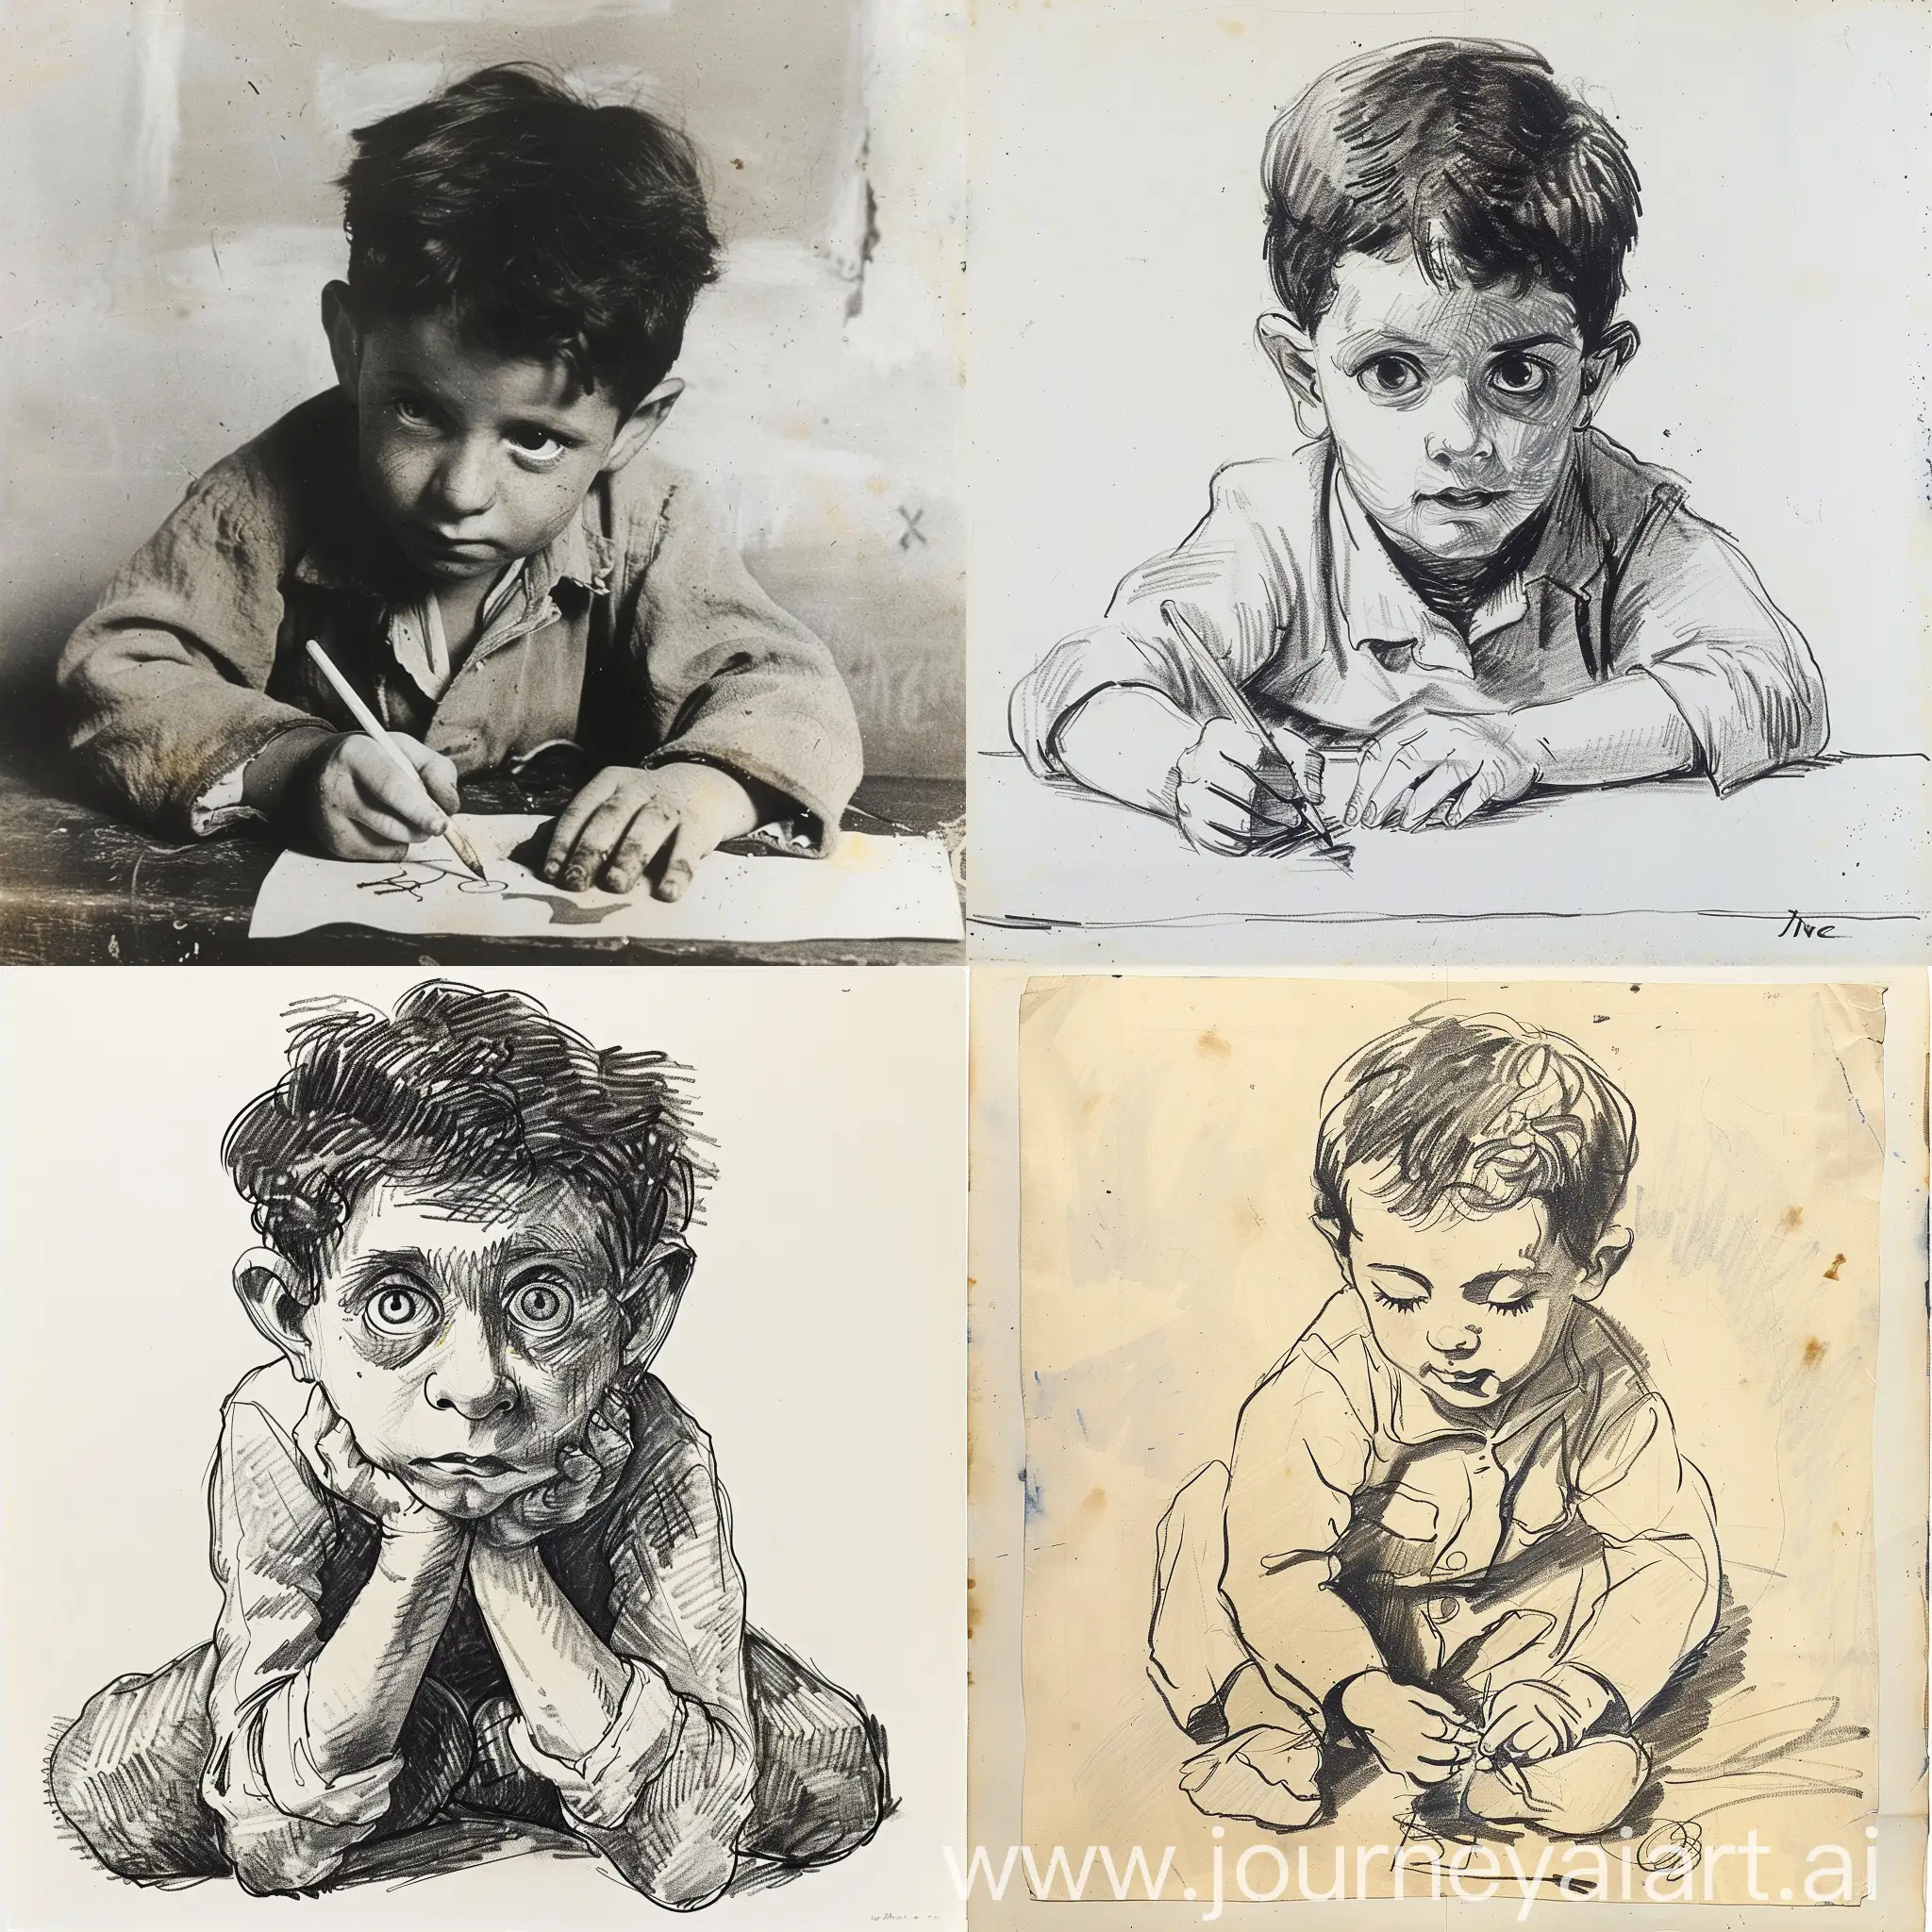 Pablo-Picasso-Drawing-as-a-Child-Early-Creative-Genius